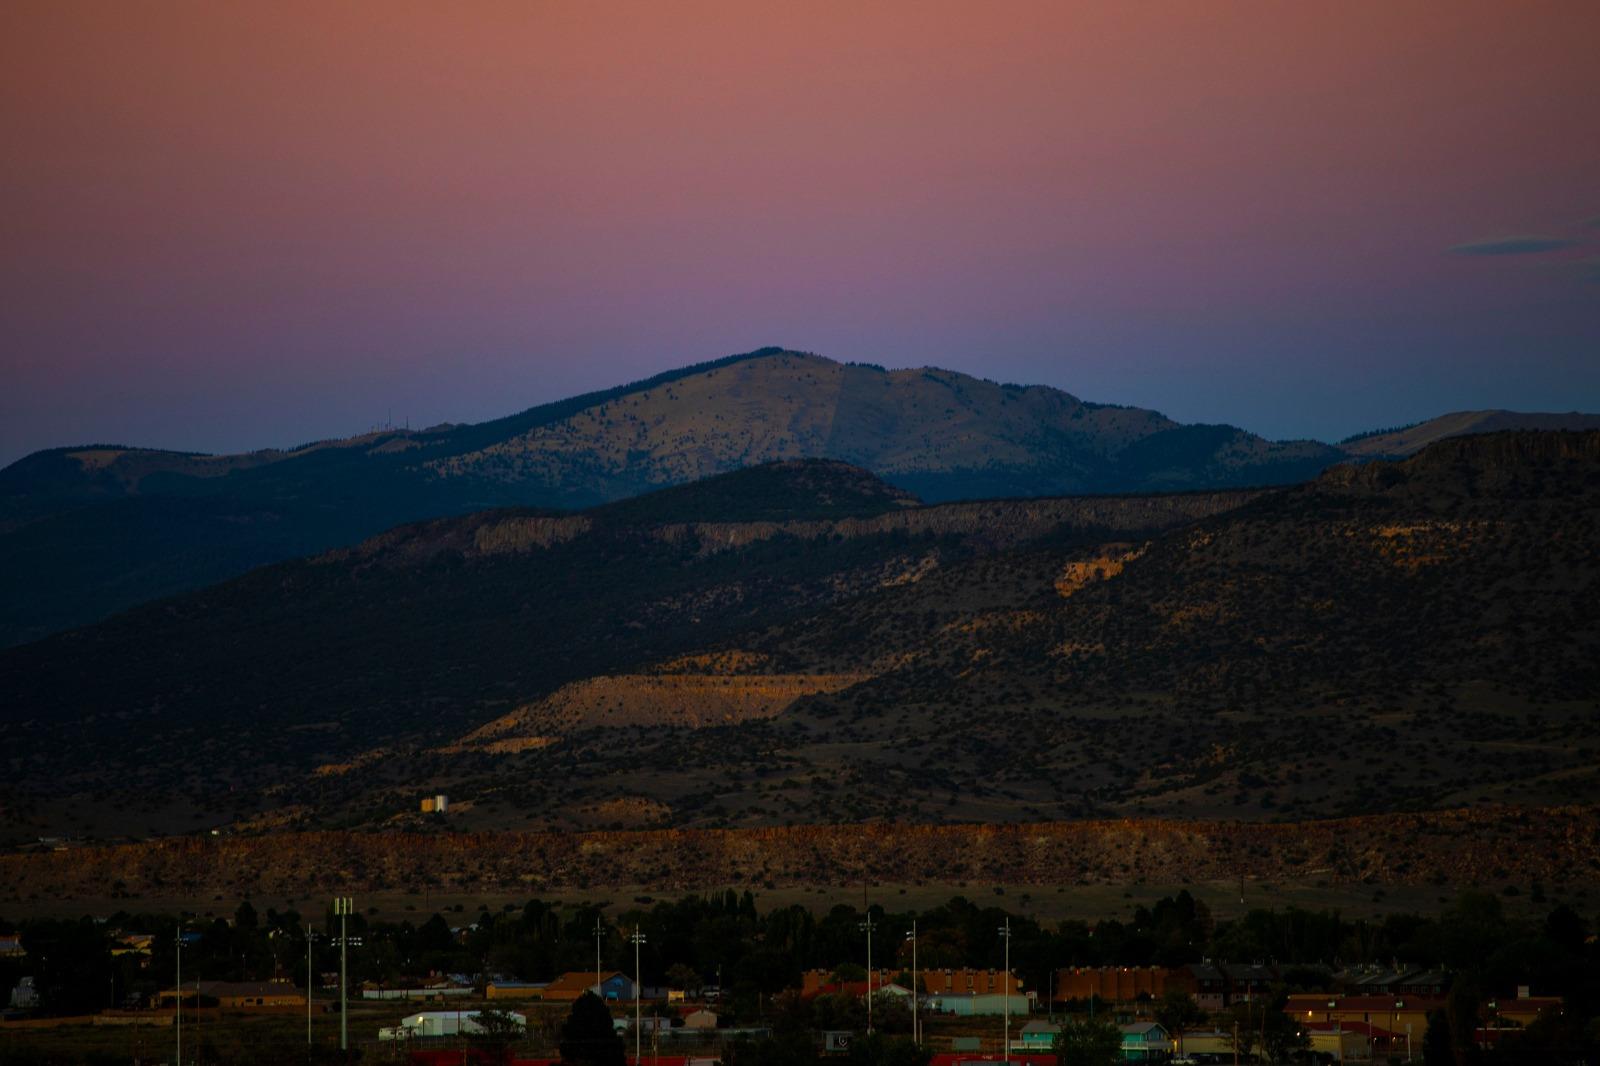 Grants, New Mexico - view